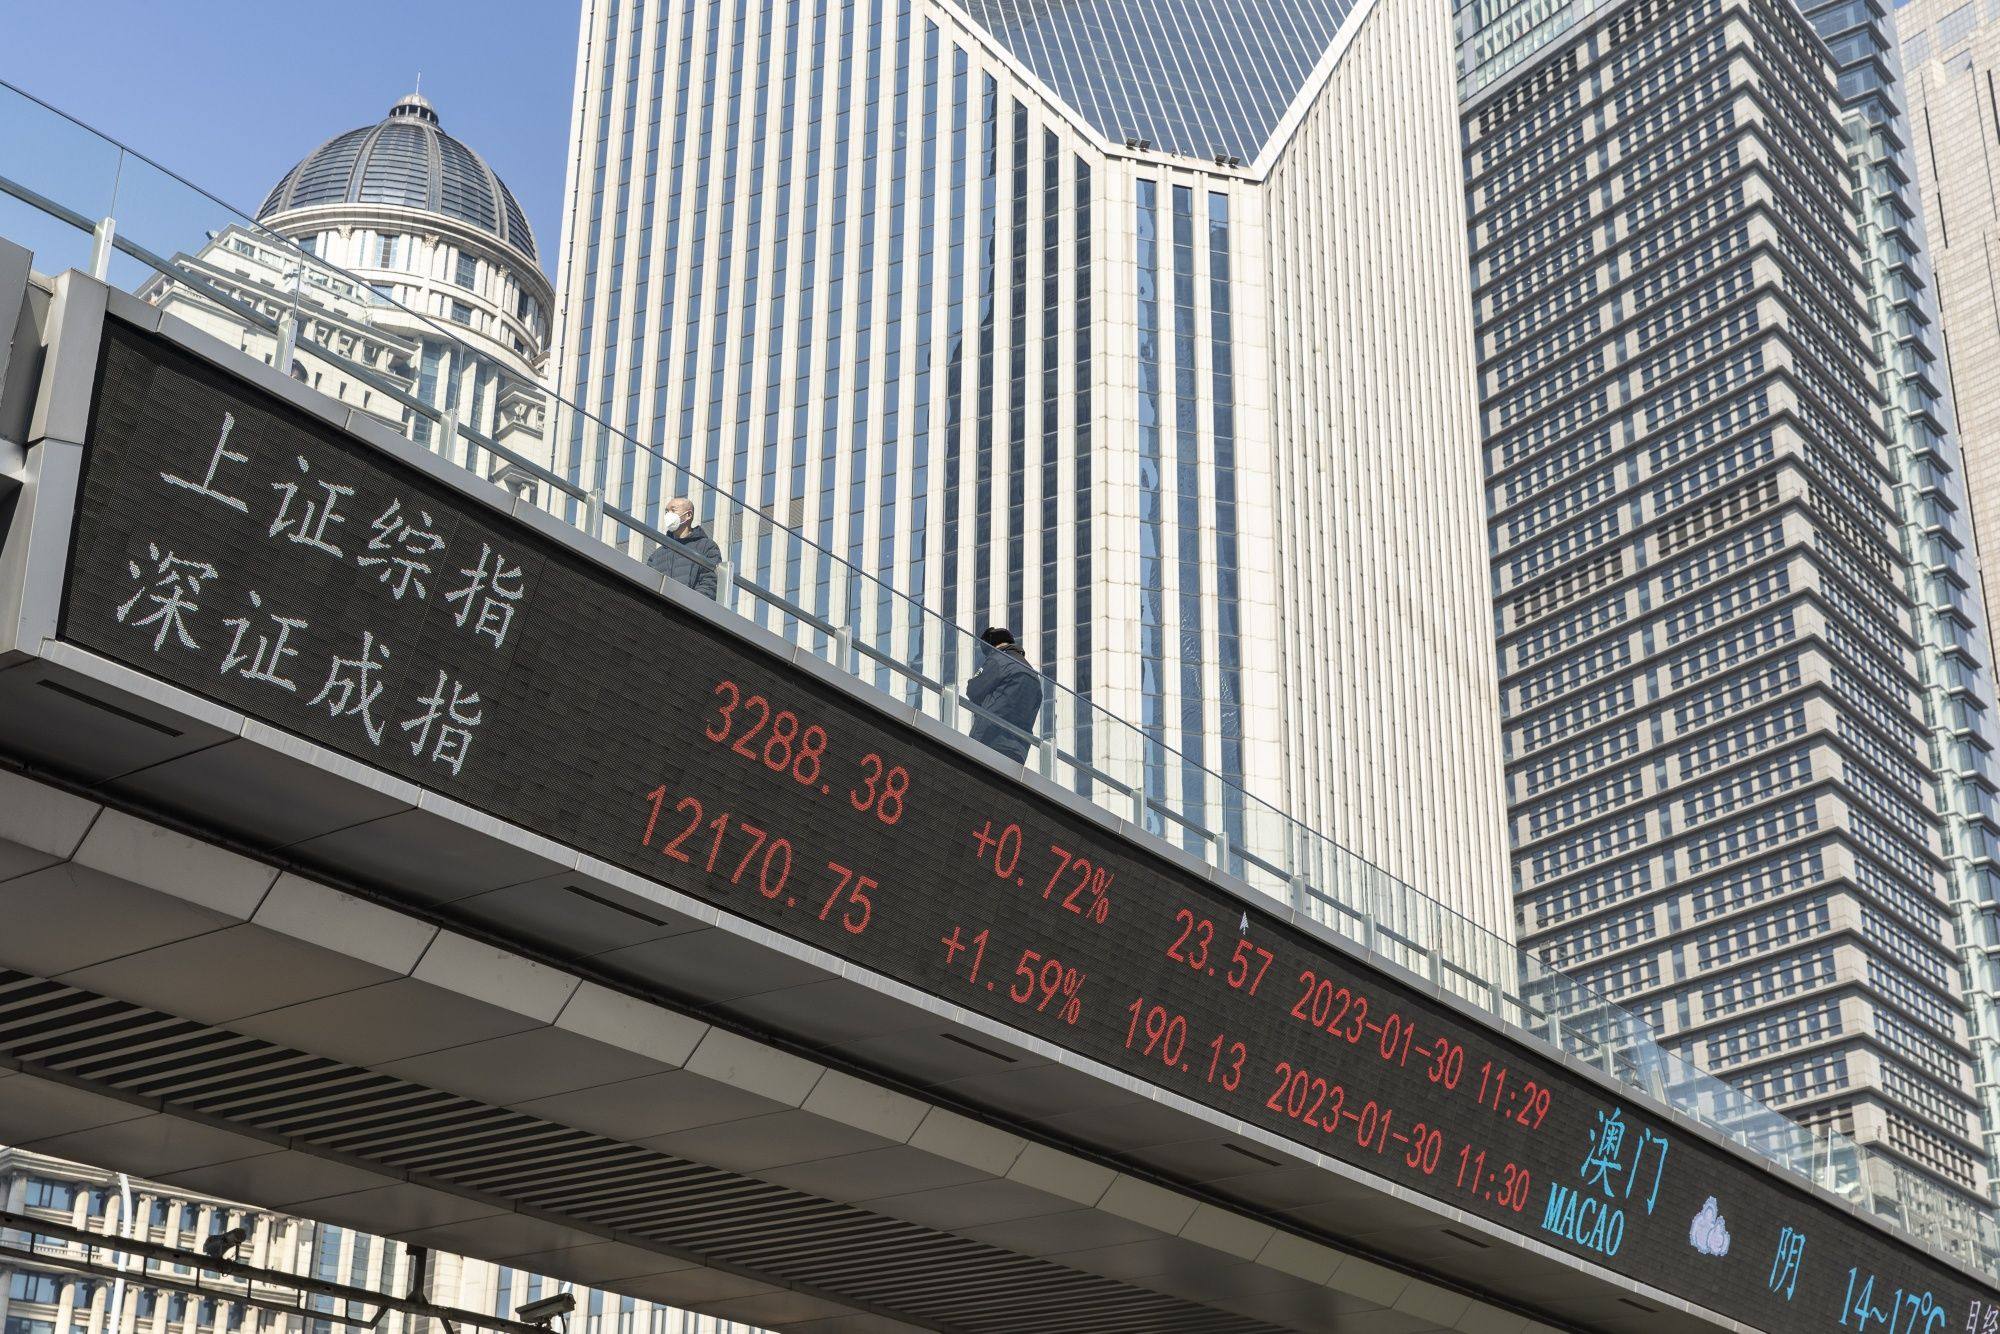 The Shanghai Composite Index and the Shenzhen Component Index displayed on a stock ticker in Pudong’s Lujiazui Financial District in Shanghai in January 2023. Photo: Bloomberg